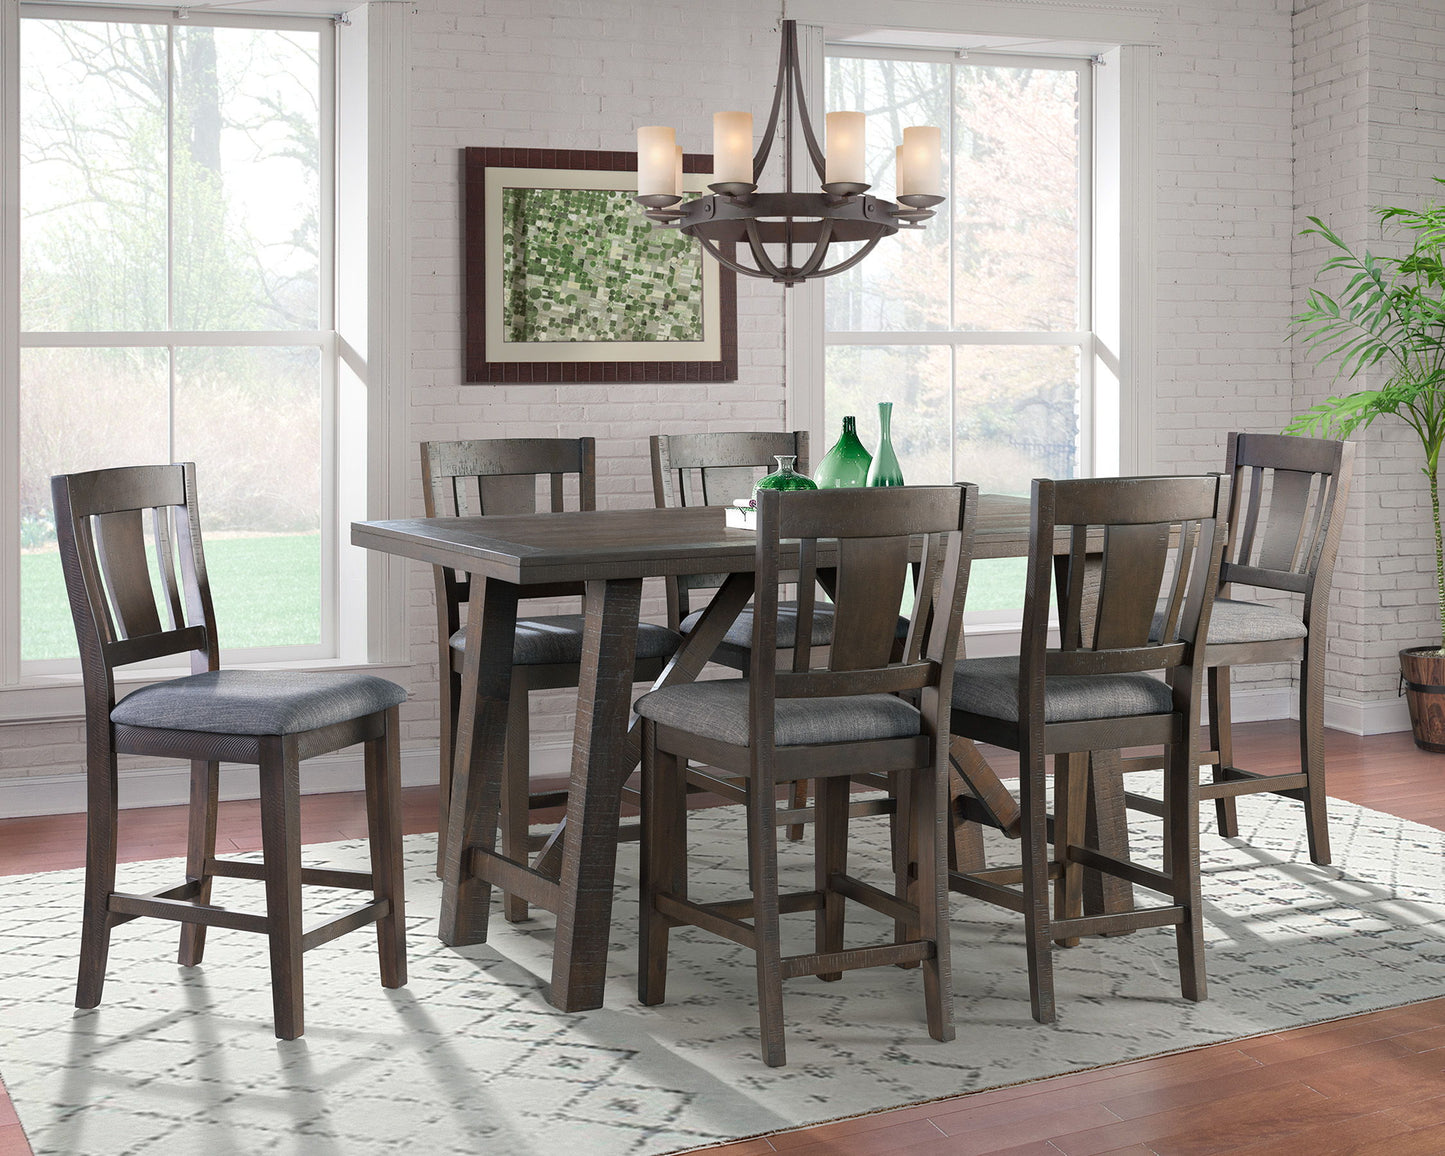 Cash - Counter Height Dining Set